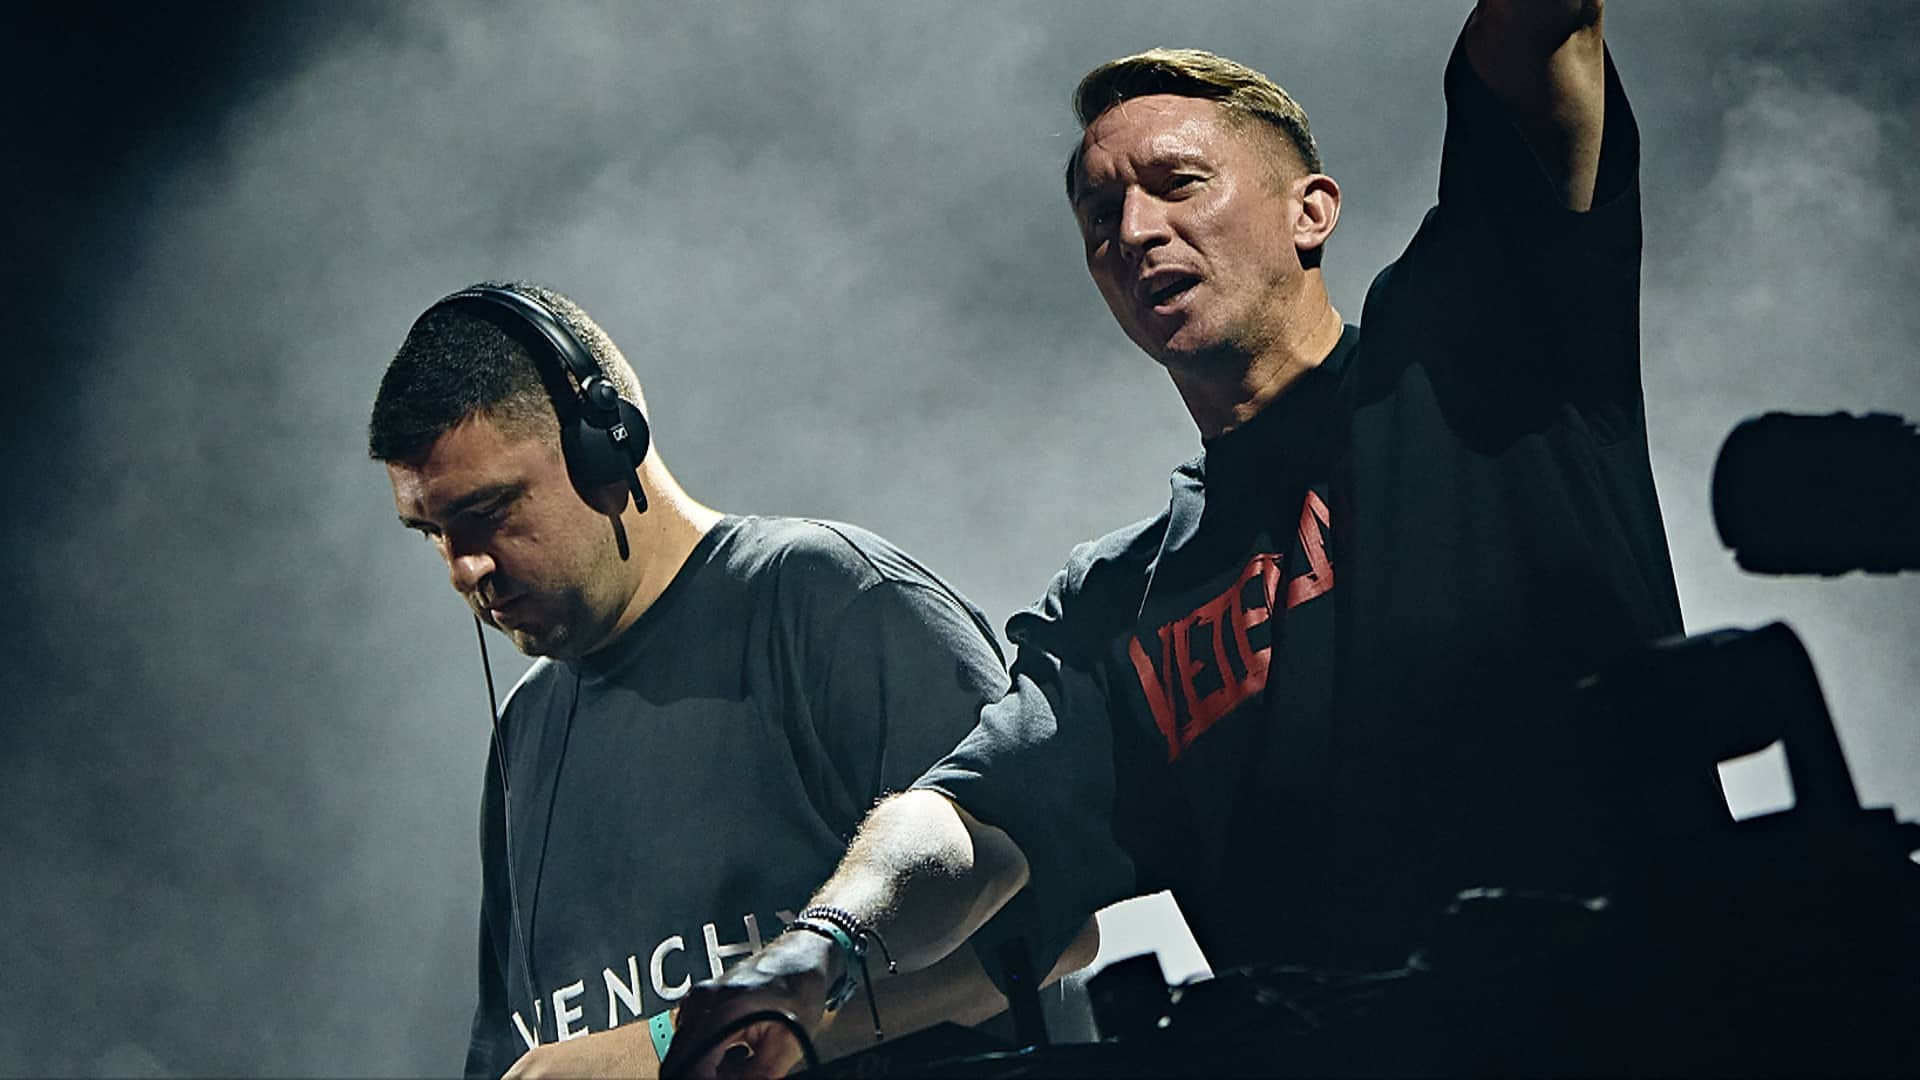 CamelPhat remix Eldon’s ‘Magic Me’, the first single of their new label: Listen